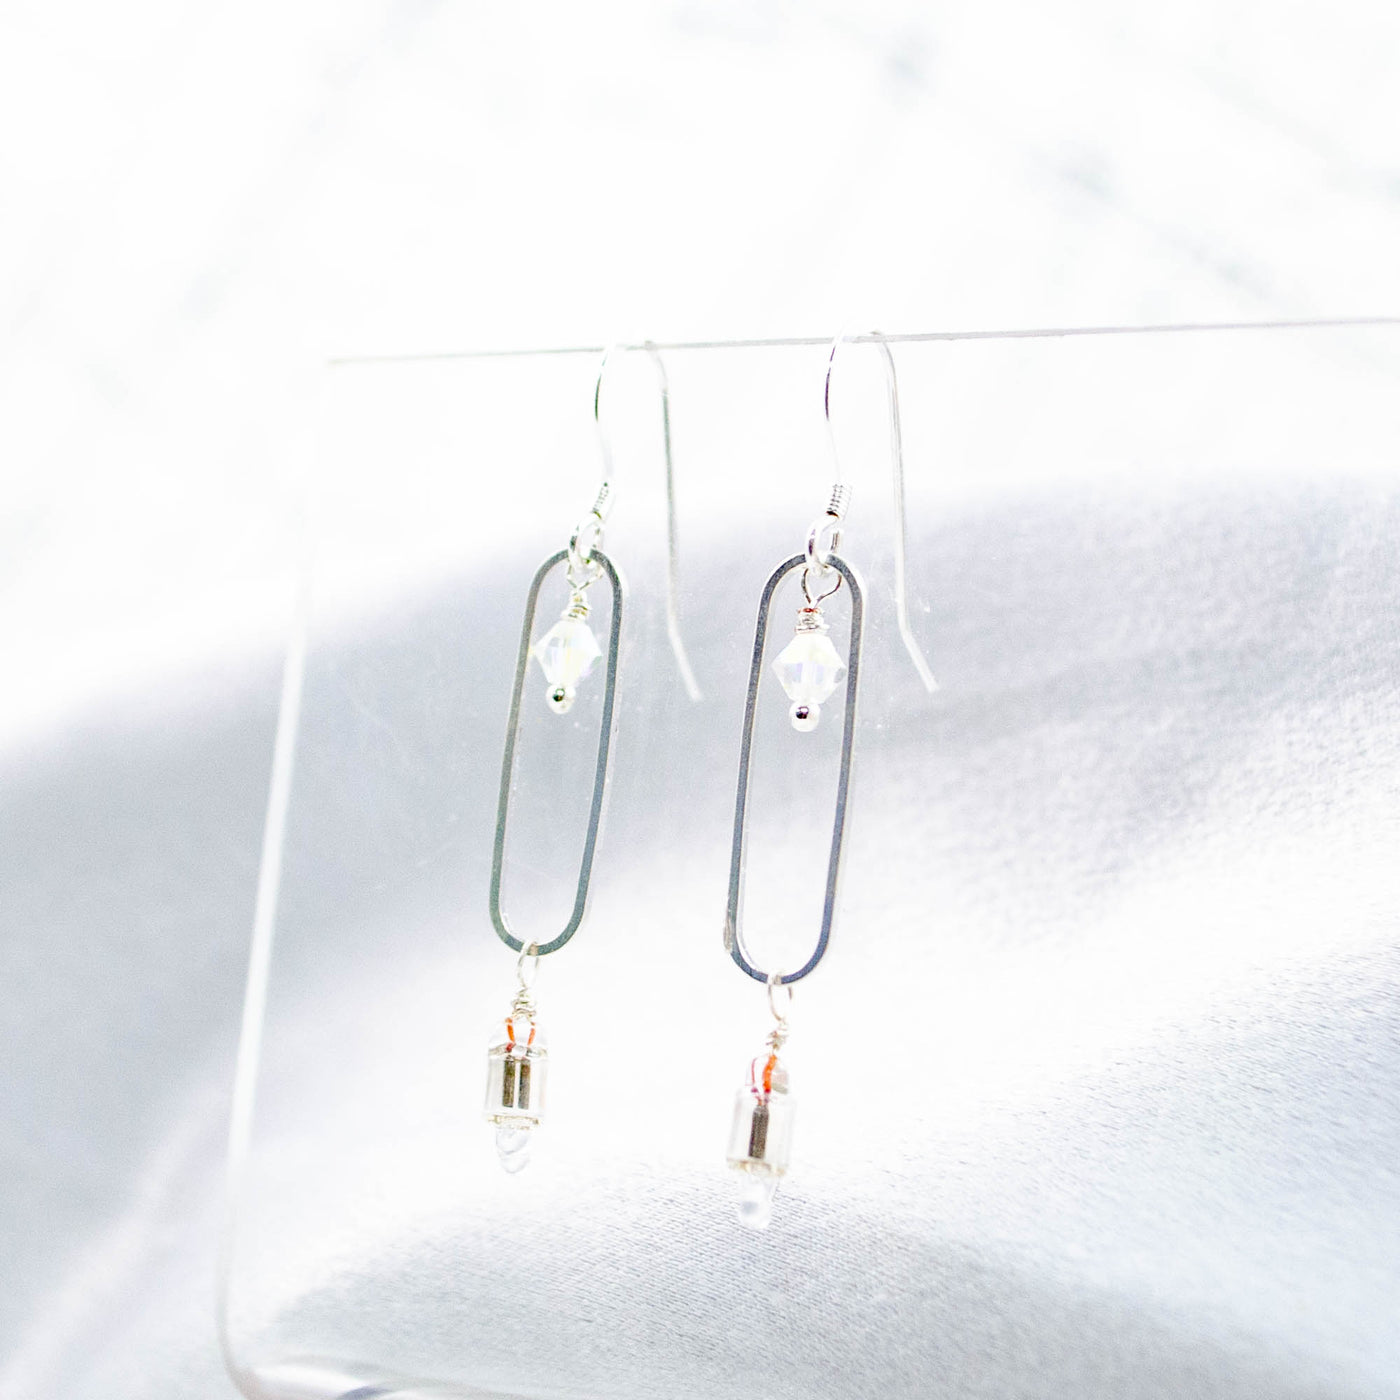 Electronic Component Earrings - Diodes